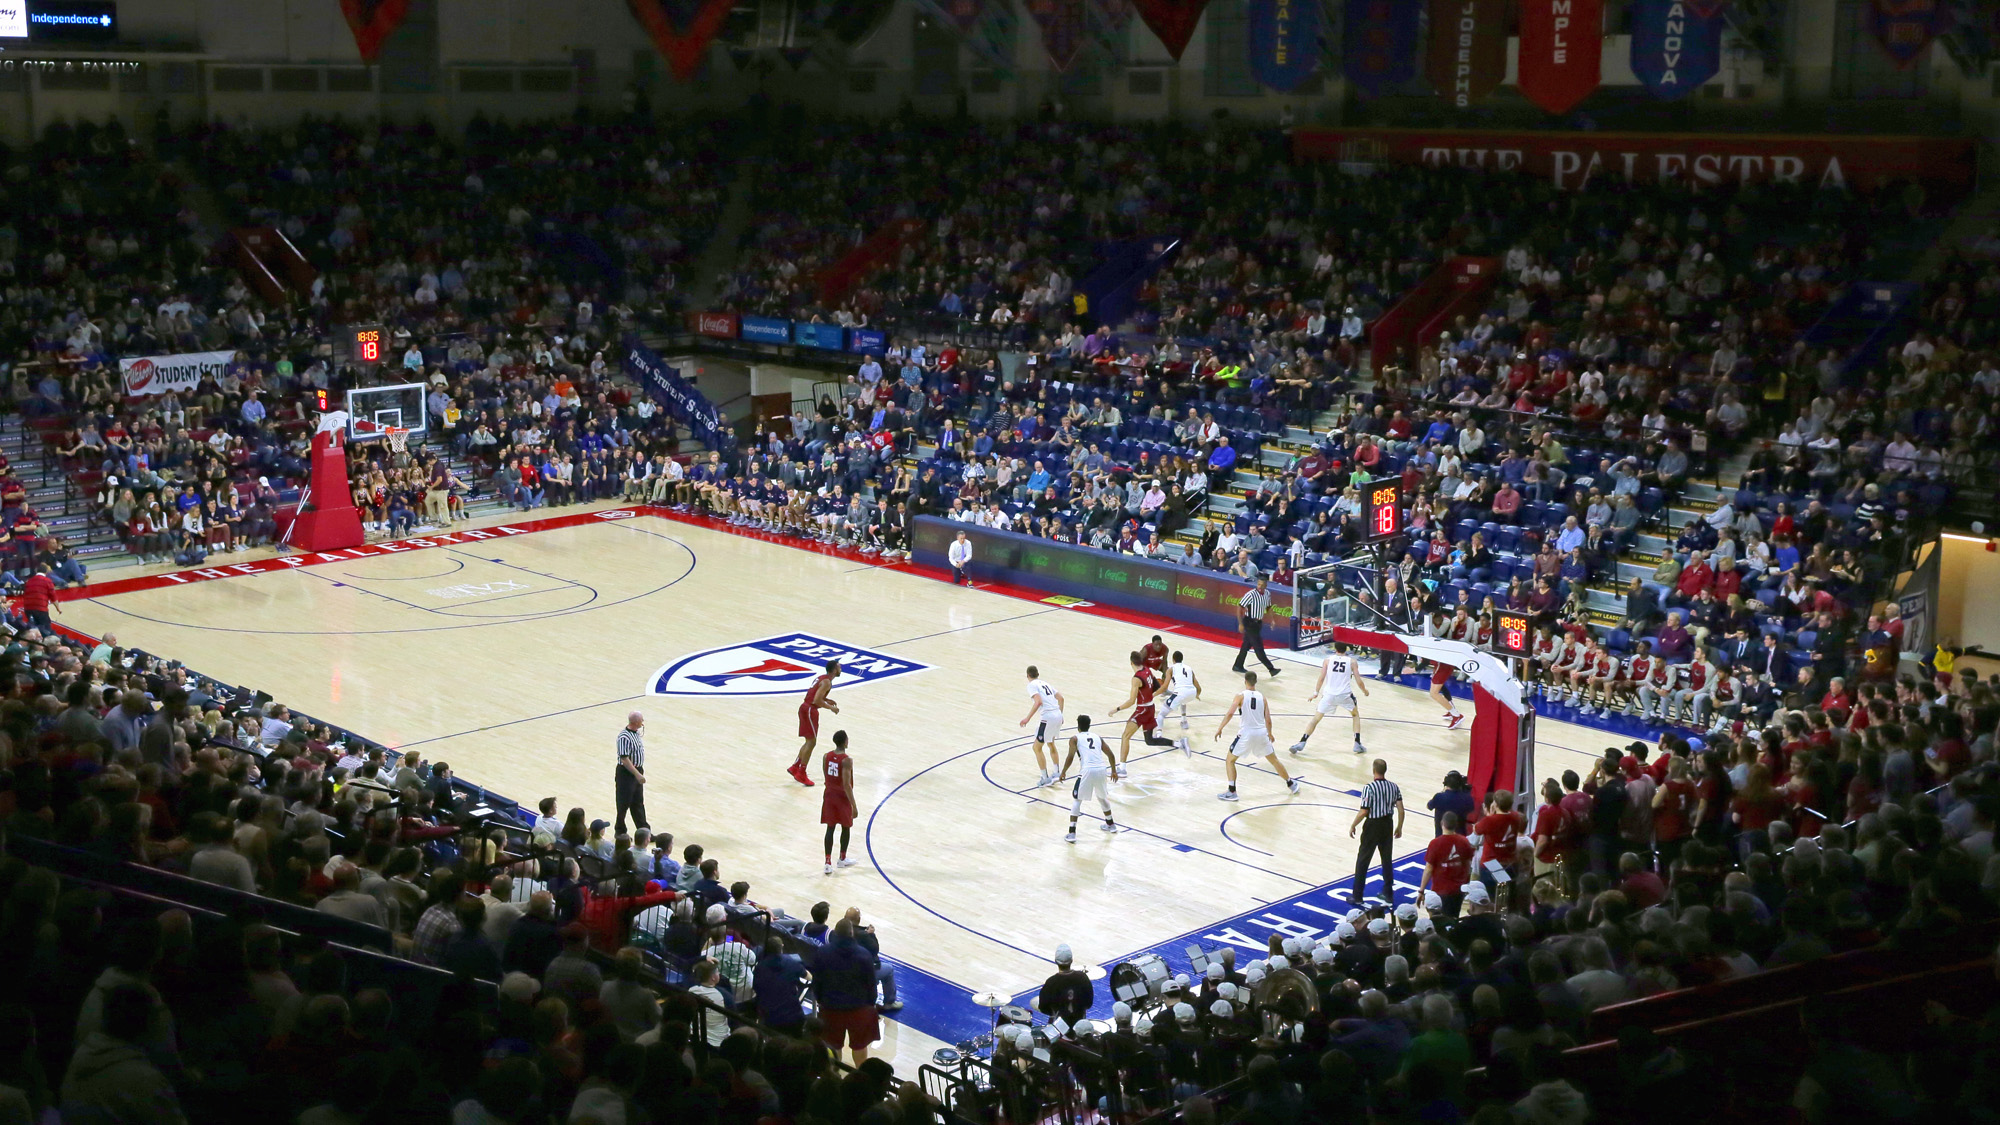 Penn men's basketball players play a game at the Palestra.